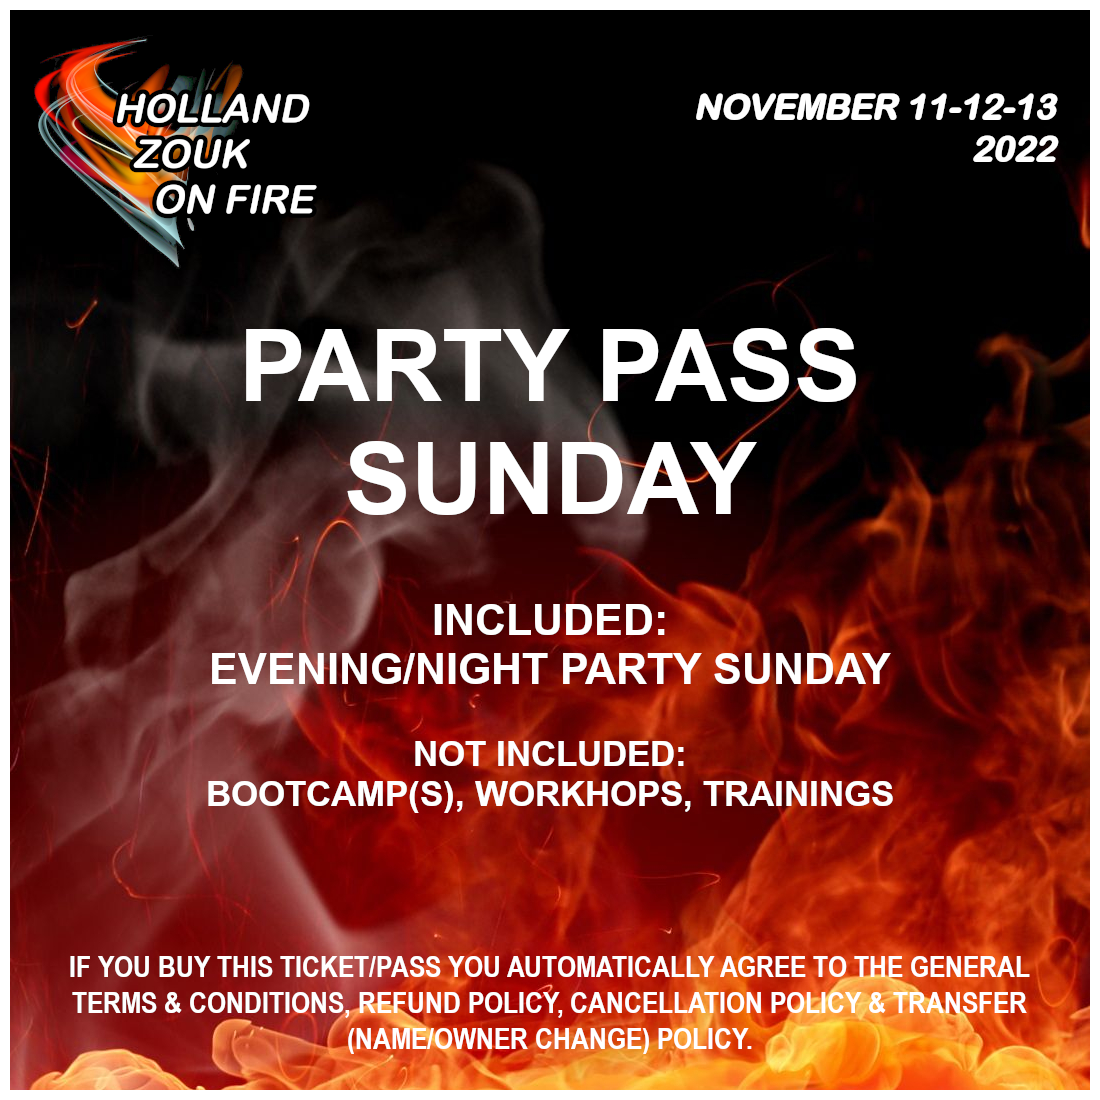 PARTY PASS SUNDAY – HOLLAND ZOUK ON FIRE